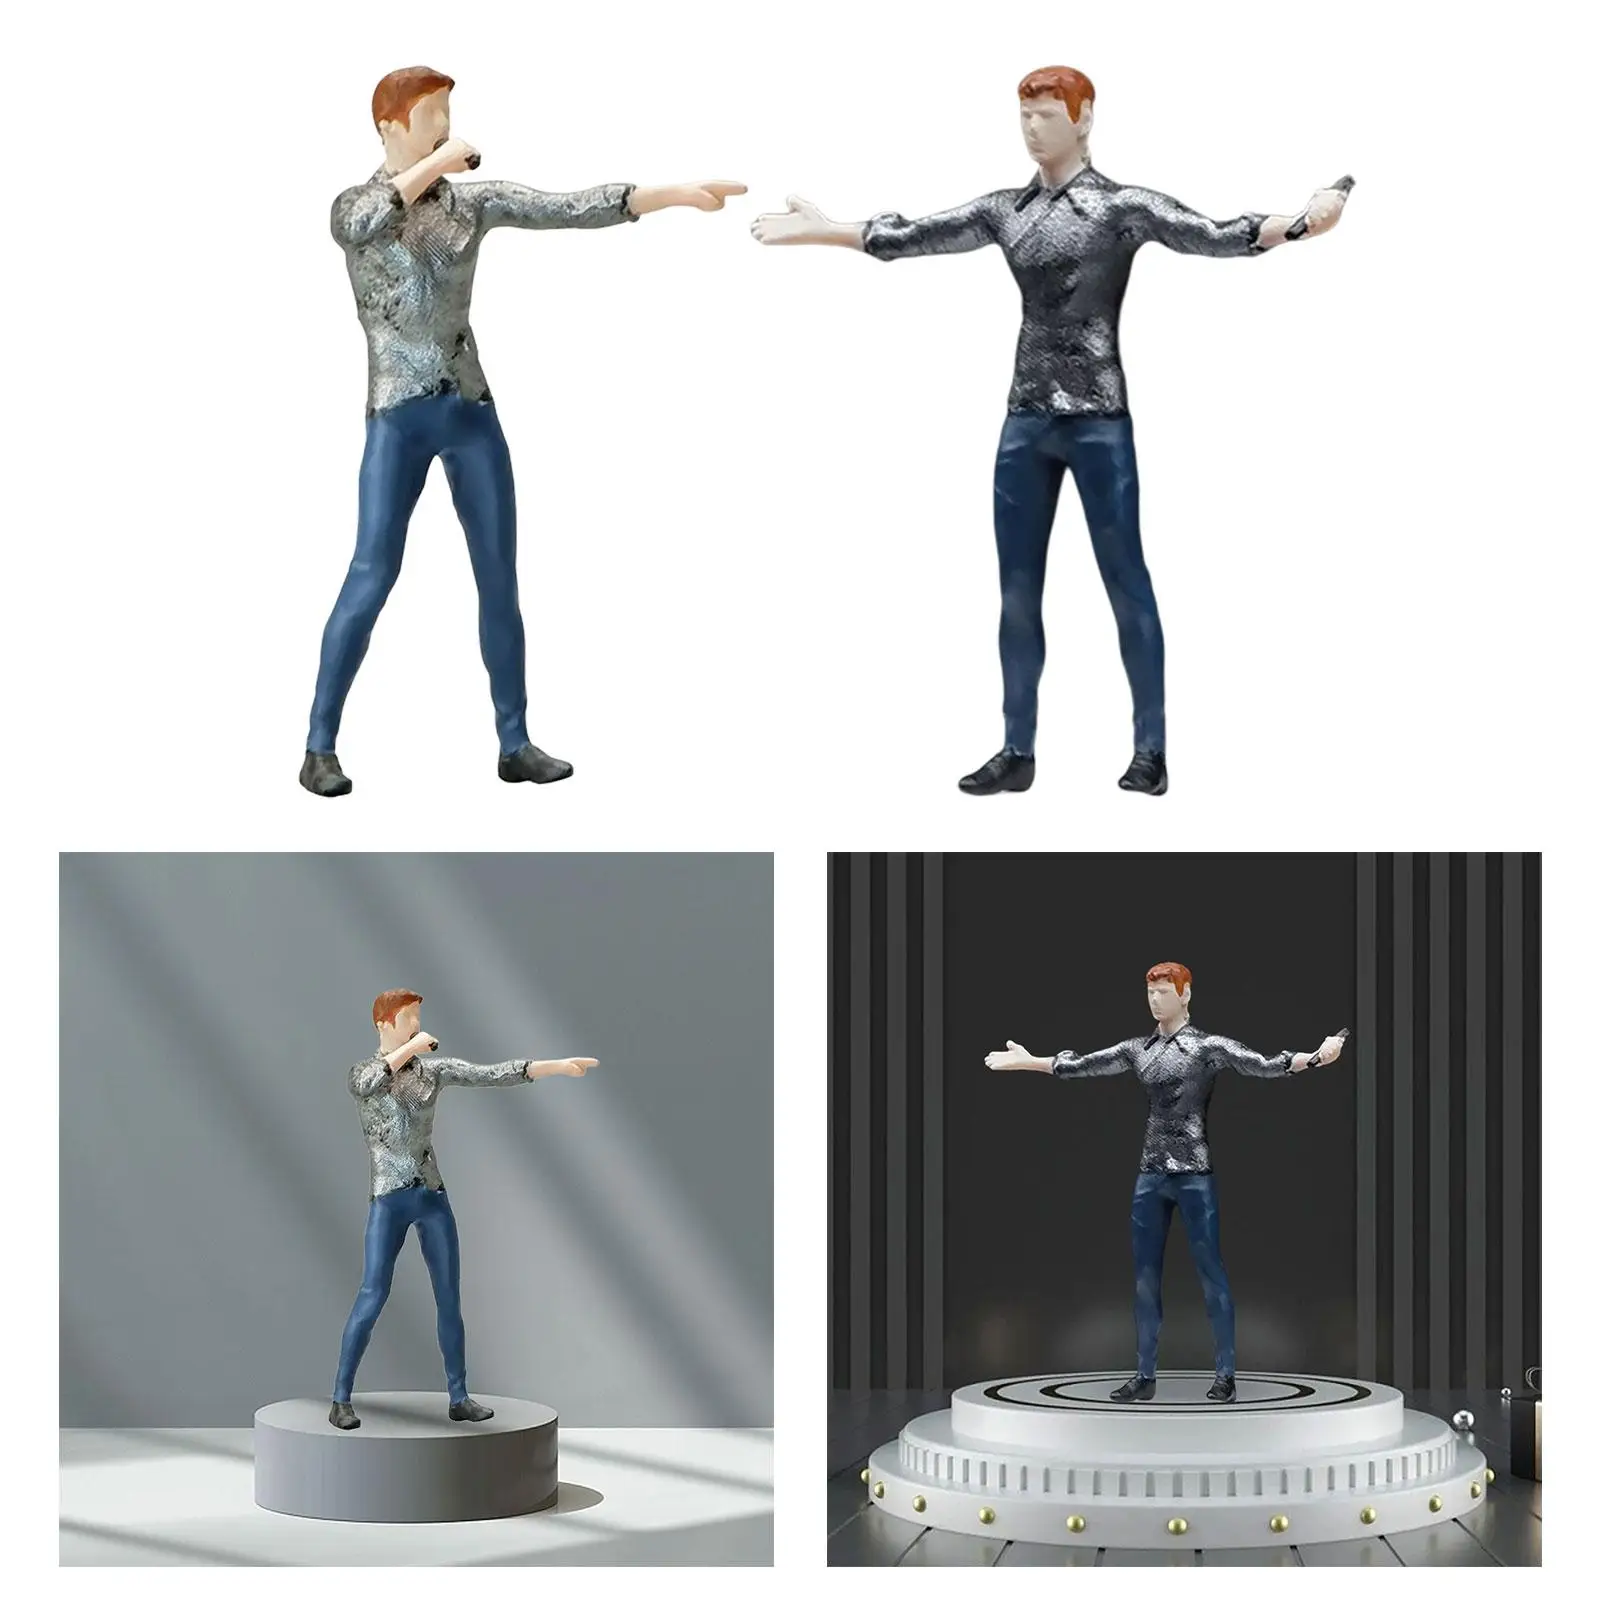 1/64 Male Singer Figures Street Singer Figures People Figurines for Photography Props Micro Landscapes Dollhouse Decoration